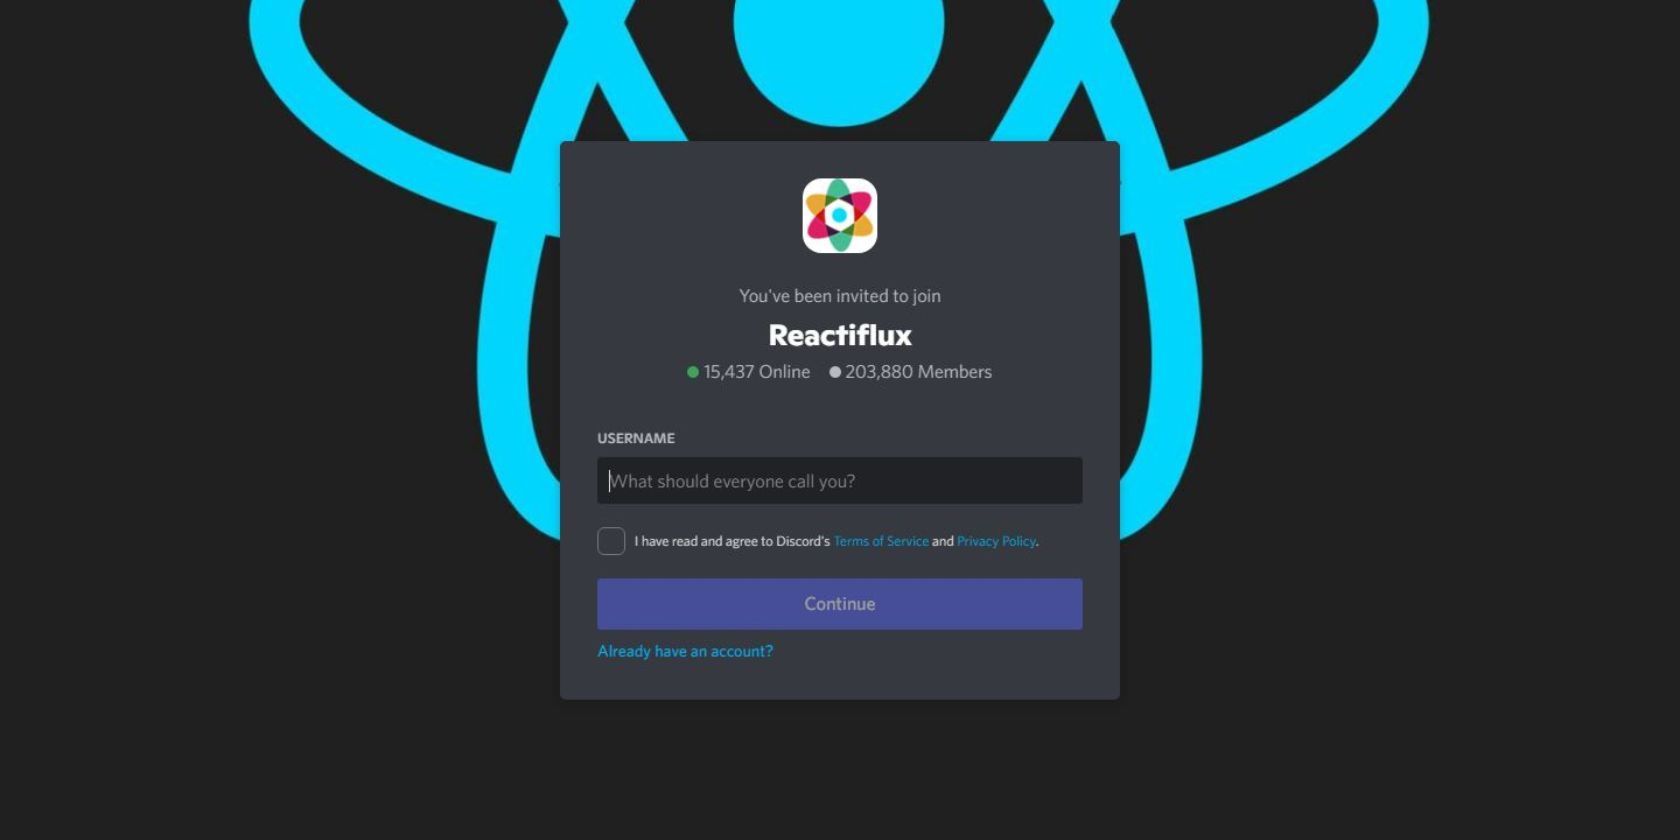 A screenshot of Reactiflux's invite page